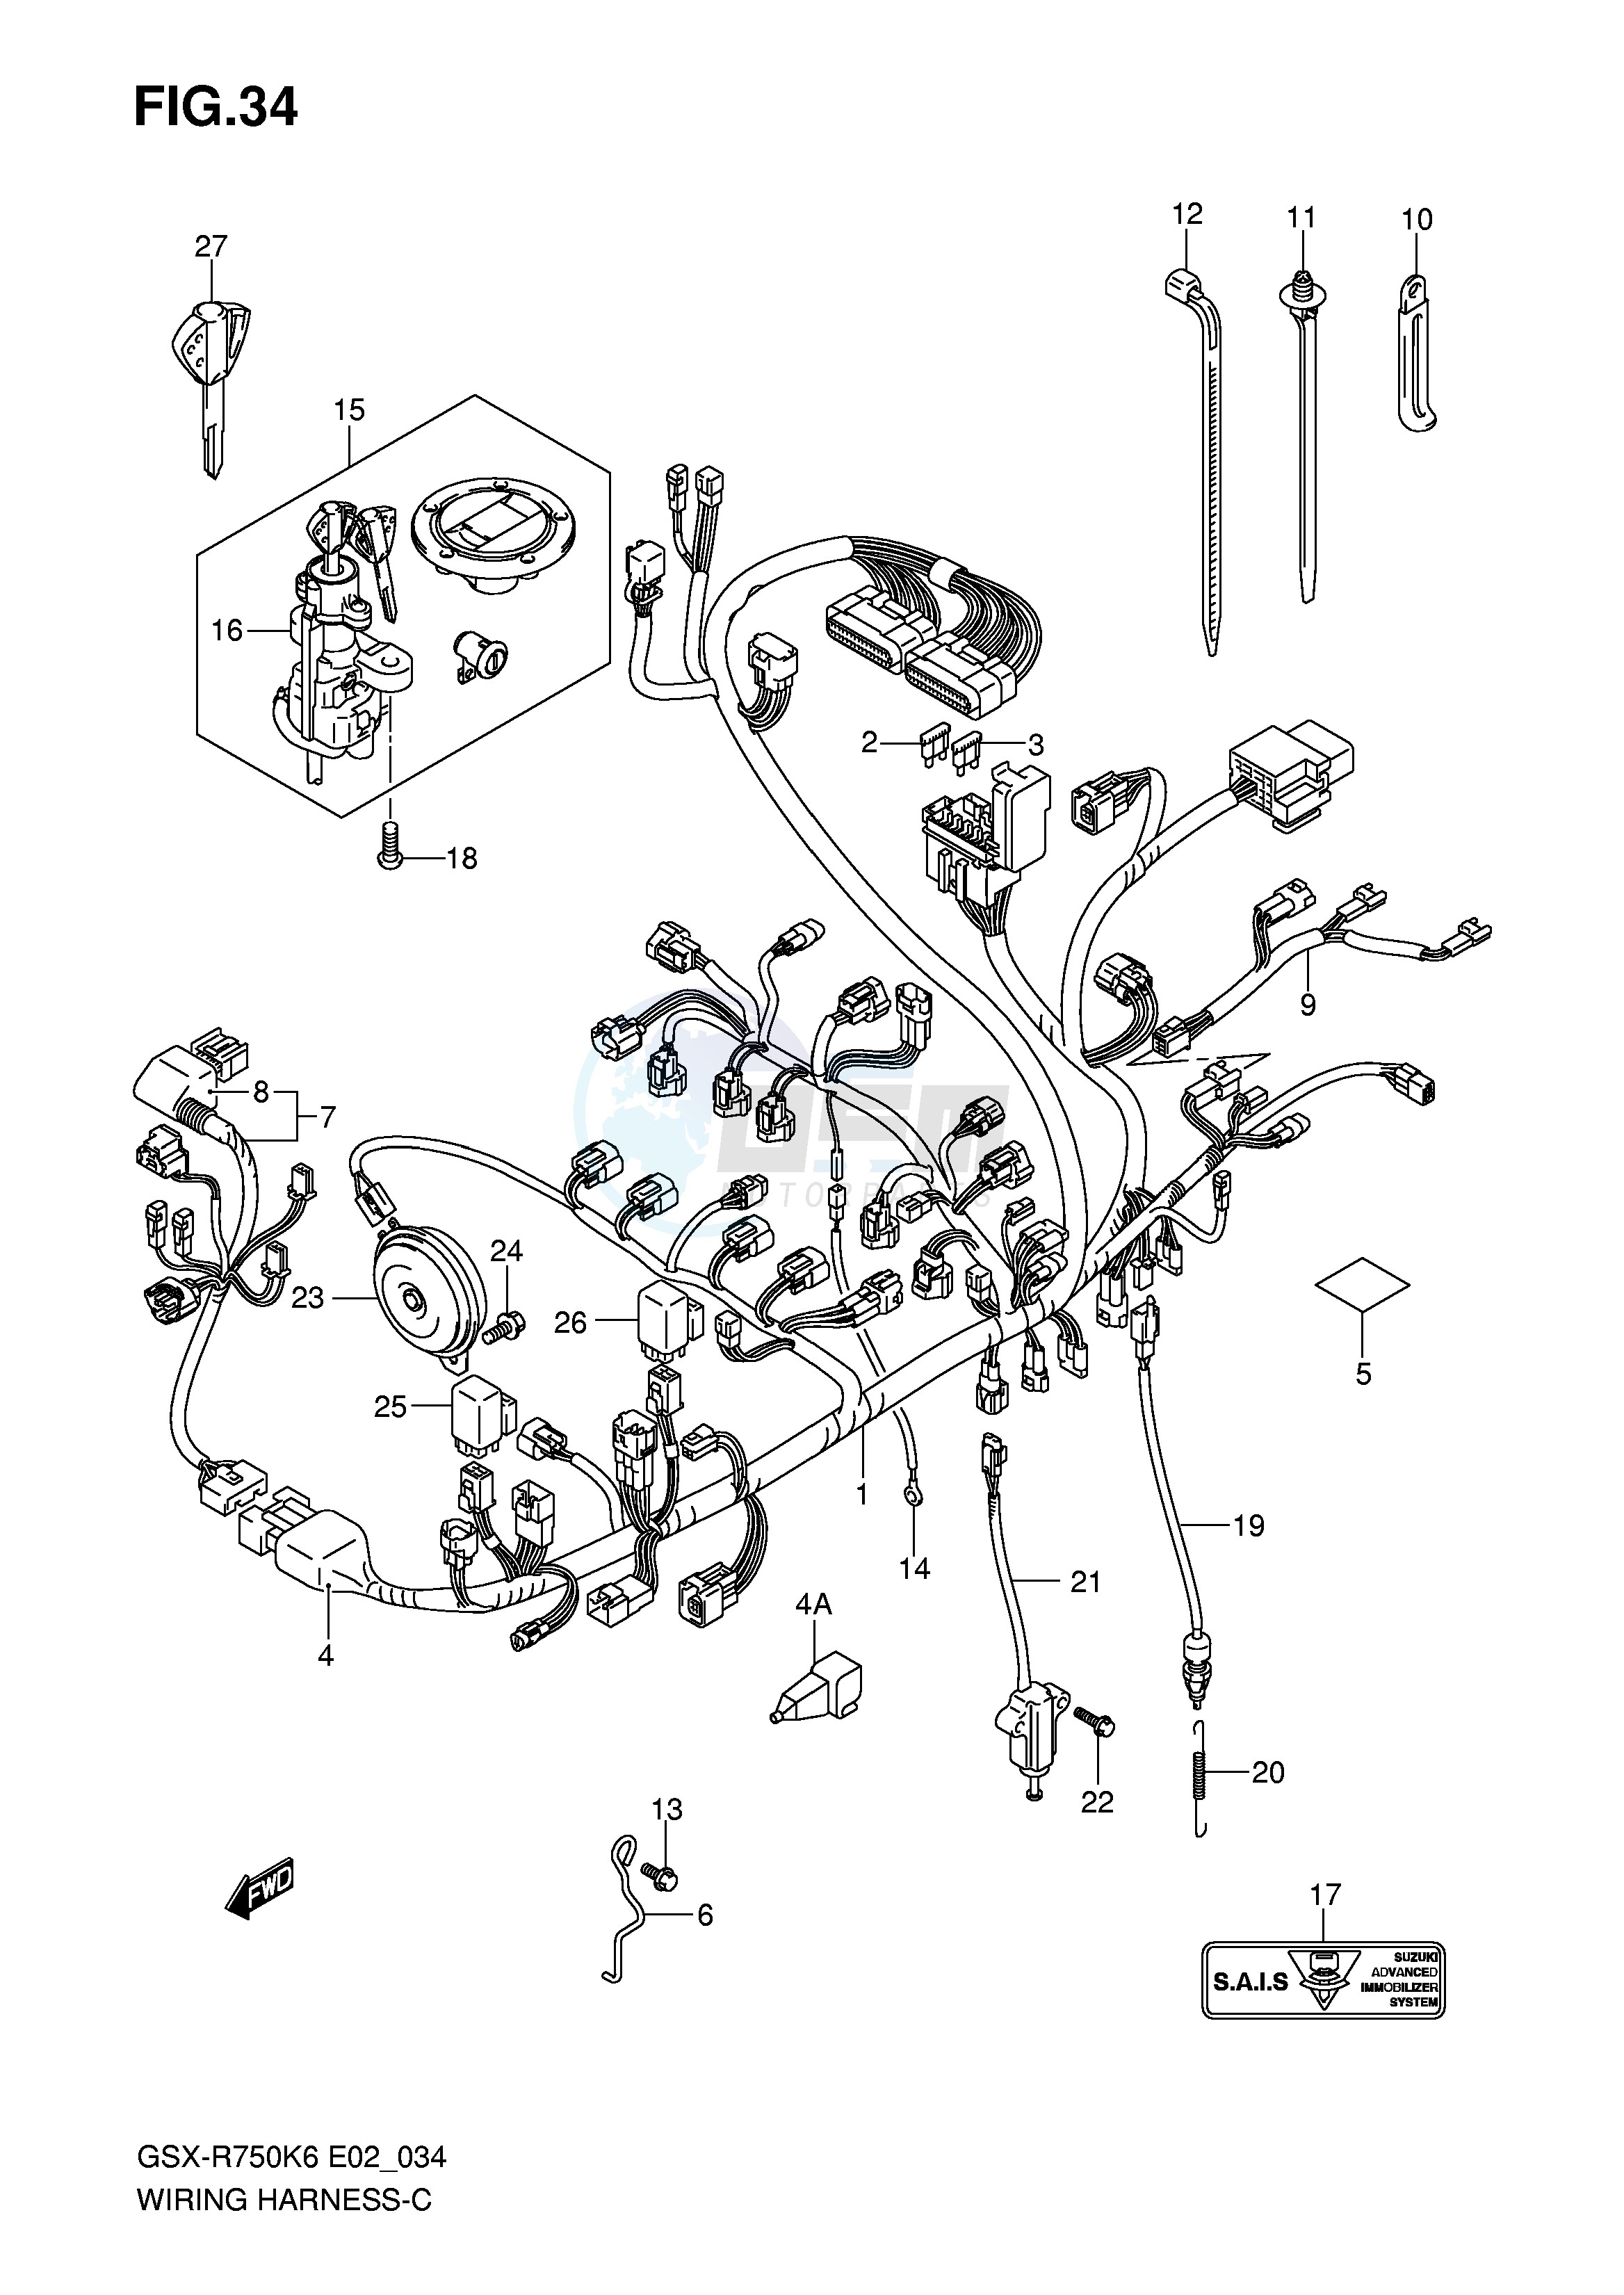 WIRING HARNESS (NOTE) blueprint